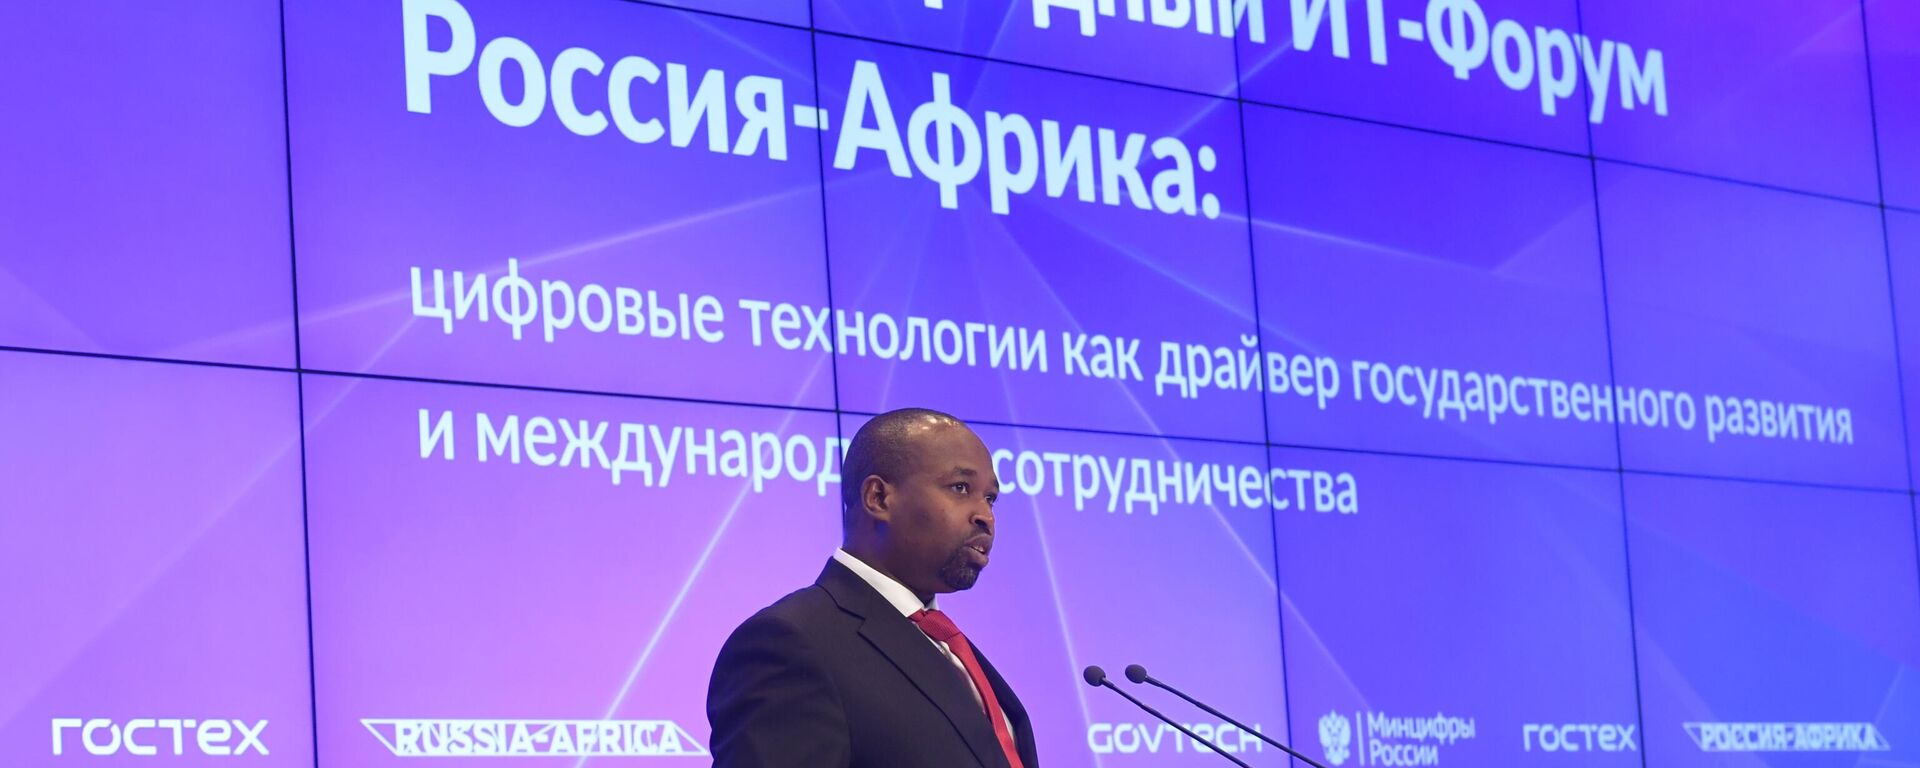 Director General of Information Network Security Agency of the Federal Democratic Republic of Ethiopia Solomon Soka during the IT forum Russia - Africa: digital technologies as a driver of state development and international cooperation in Moscow. - Sputnik Africa, 1920, 14.04.2023